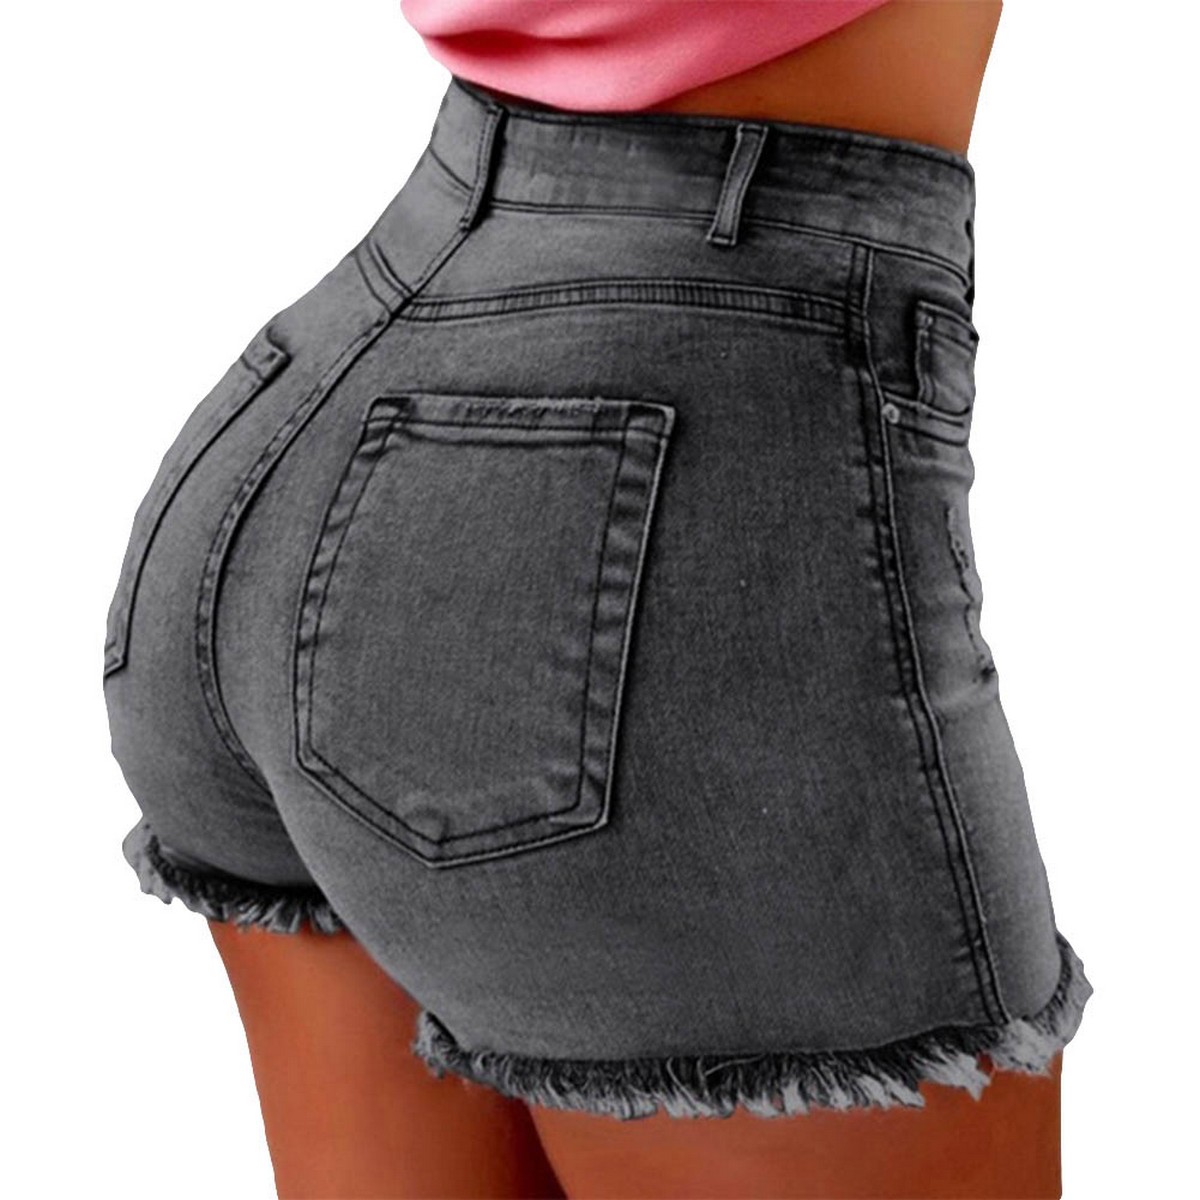 Sexy high-waisted ladies' jeans hot pants, 29,95 €